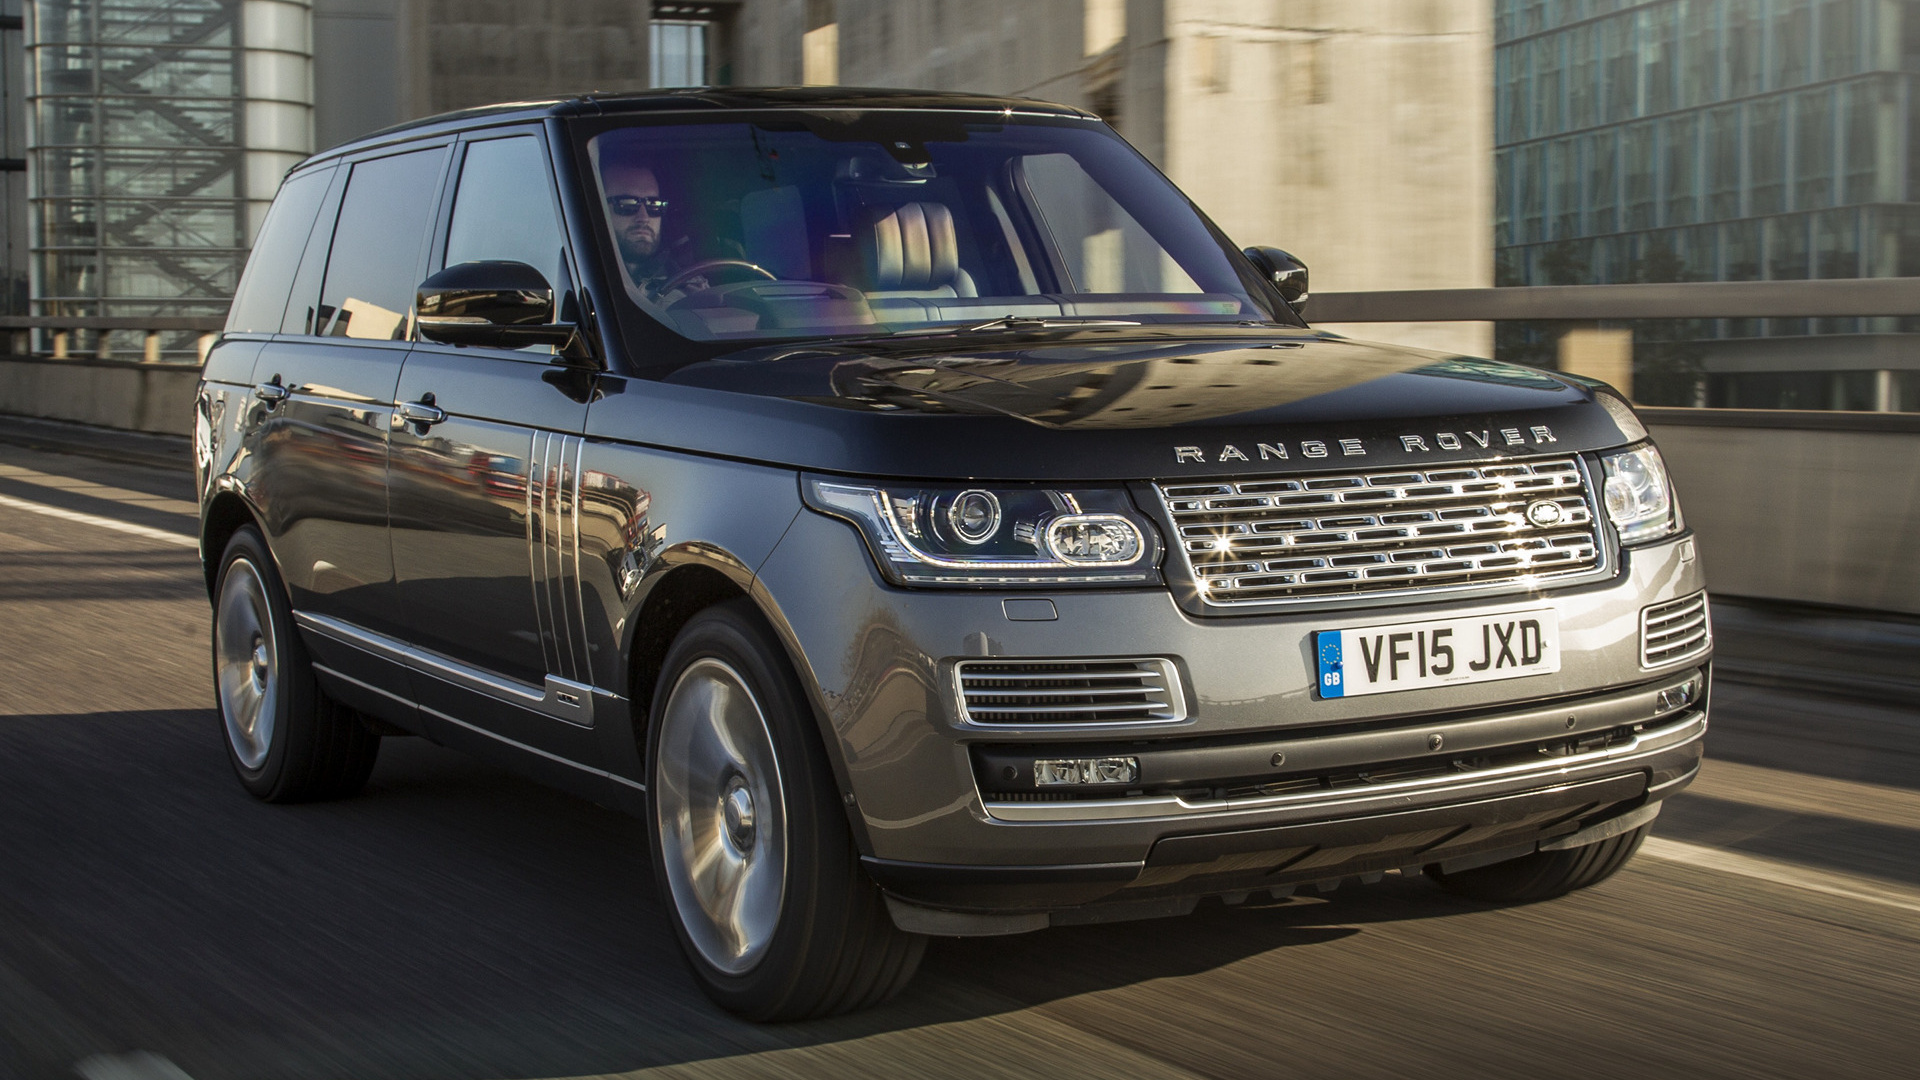 2015 Range Rover SVAutobiography [LWB] (UK) - Wallpapers and HD Images ...